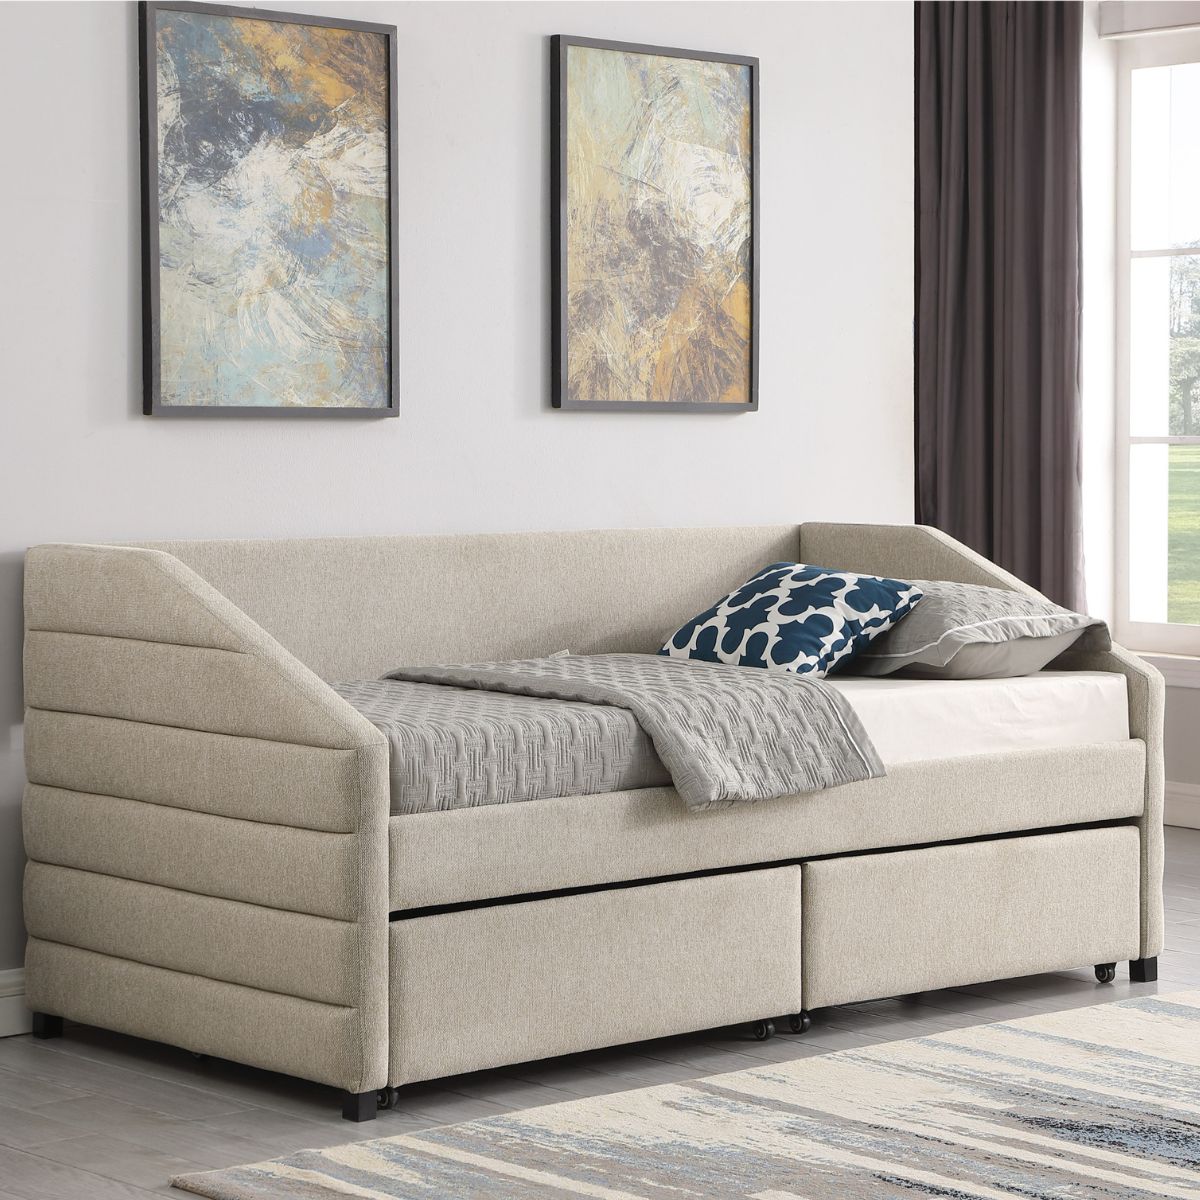 Baku Upholstered Day Bed with Storage Beige - 2